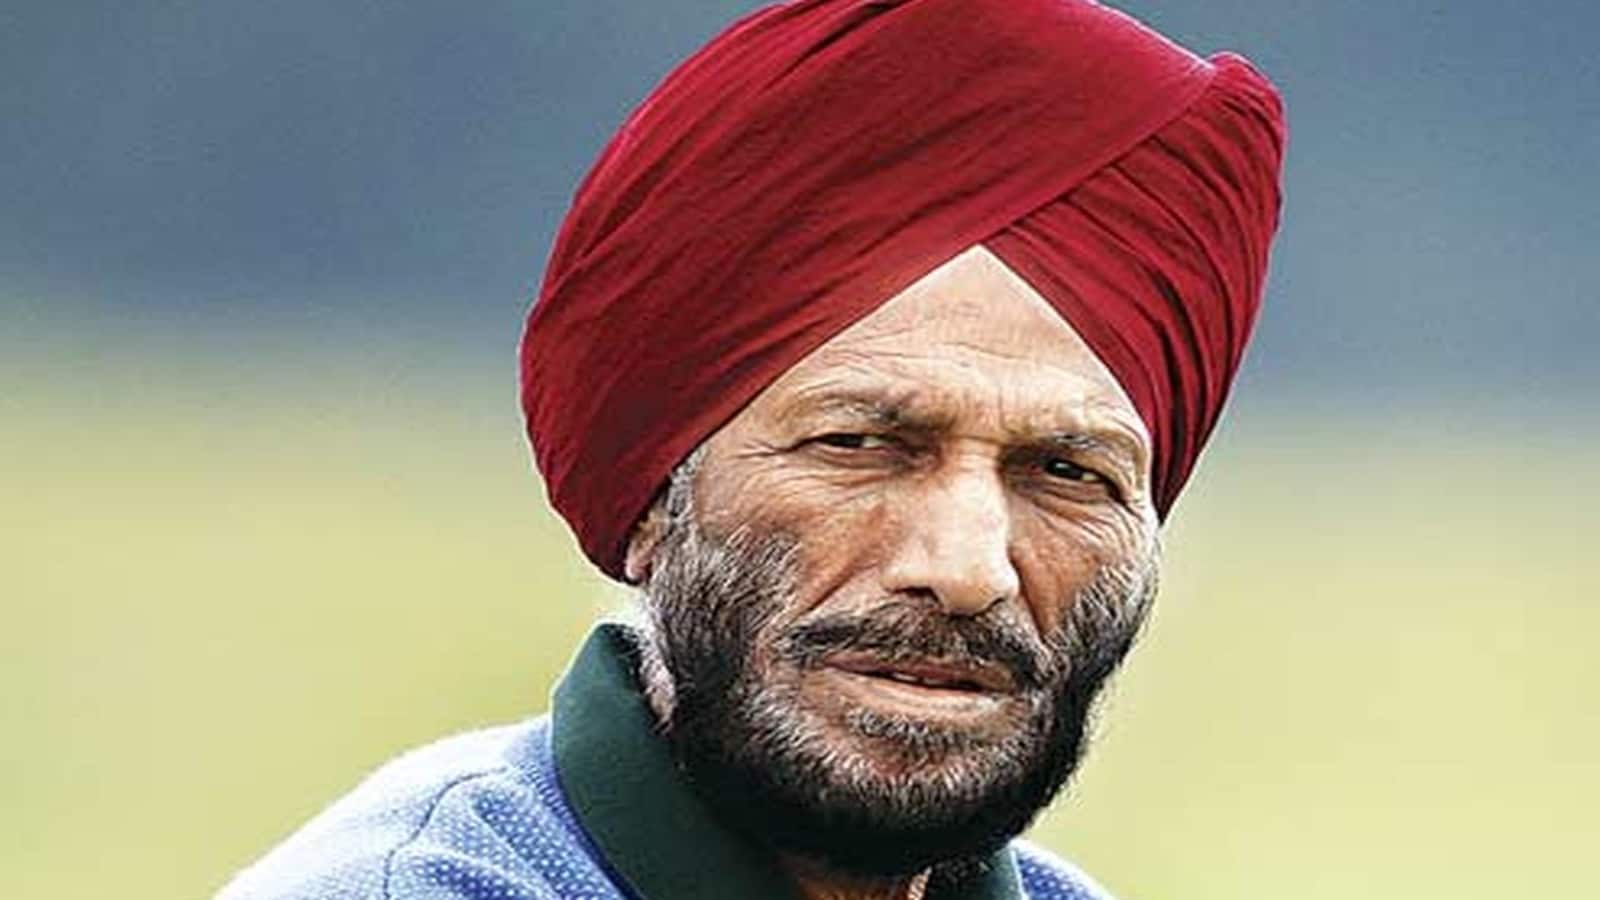 Milkha Singh, India's Flying Sikh, passes away at 91 due to COVID-19  complications